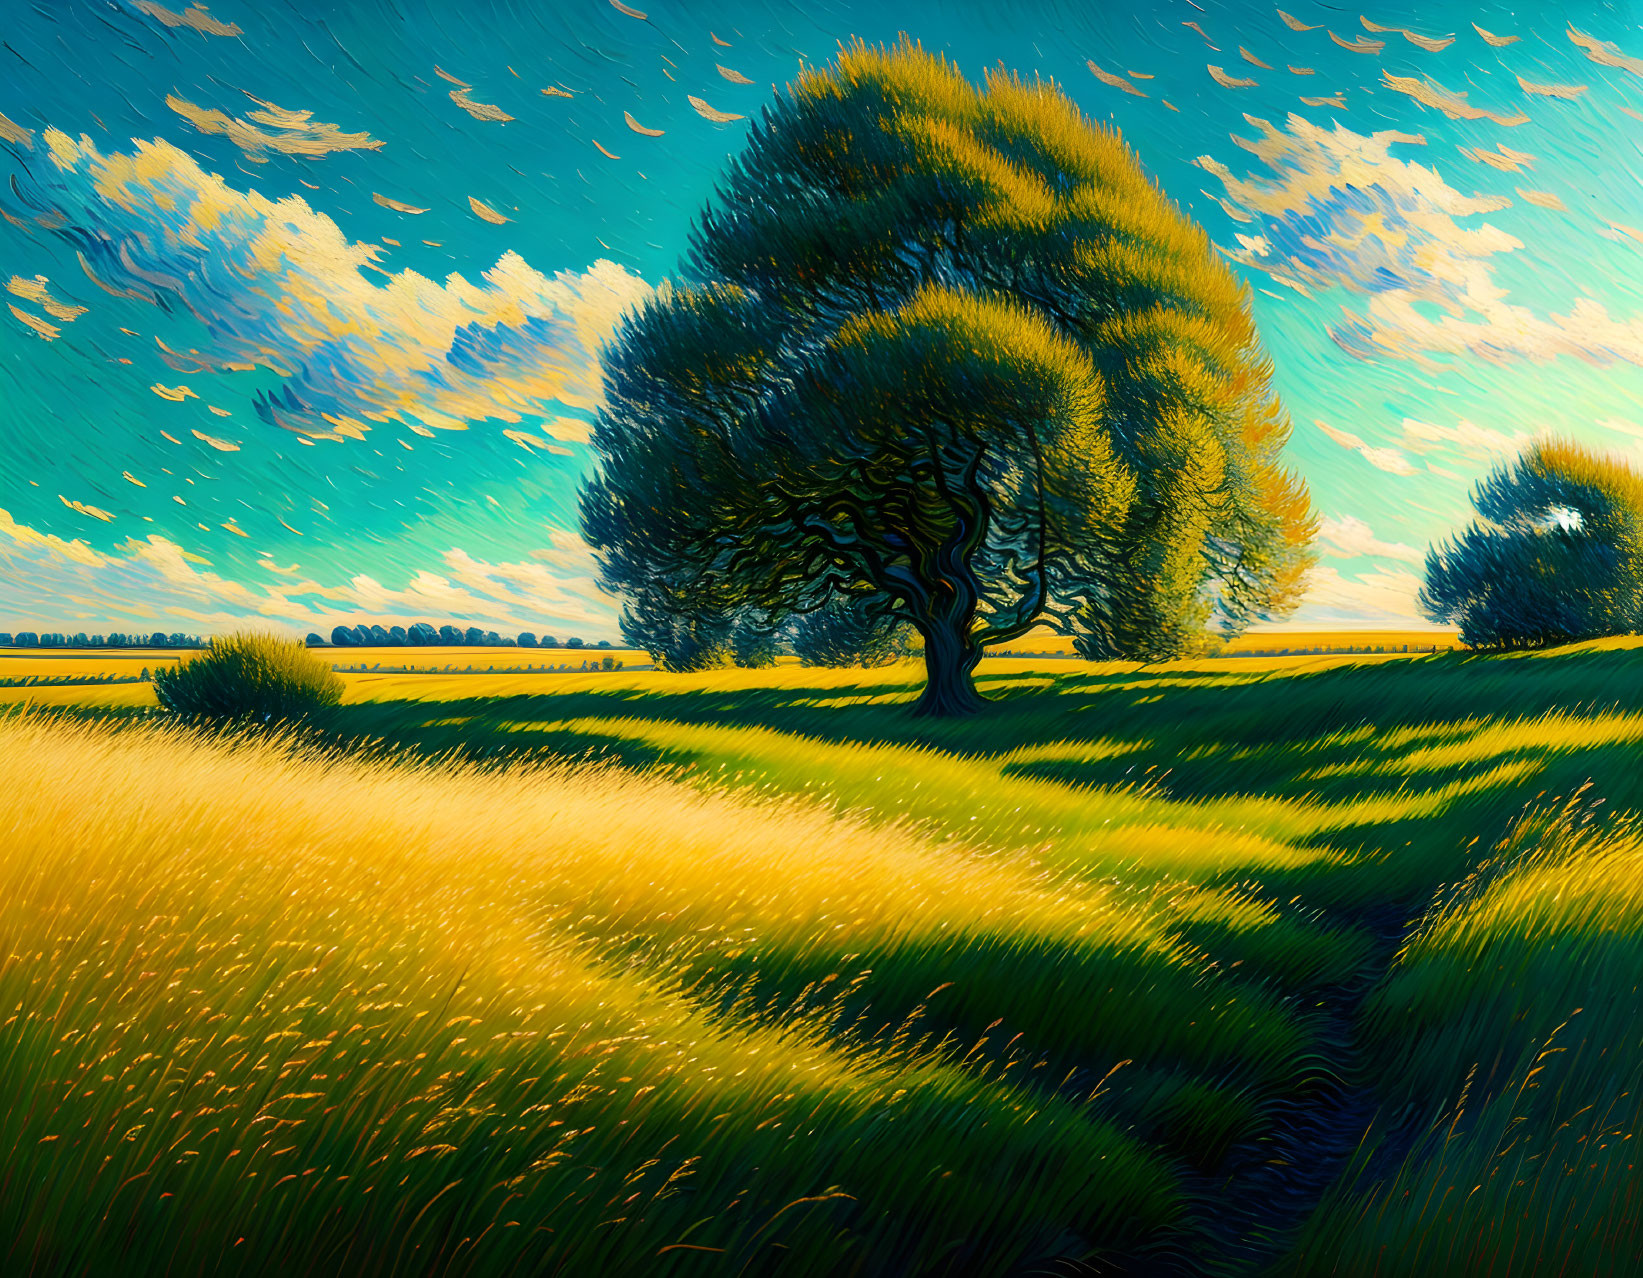 Colorful landscape painting with central tree, yellow fields, and swirling blue sky